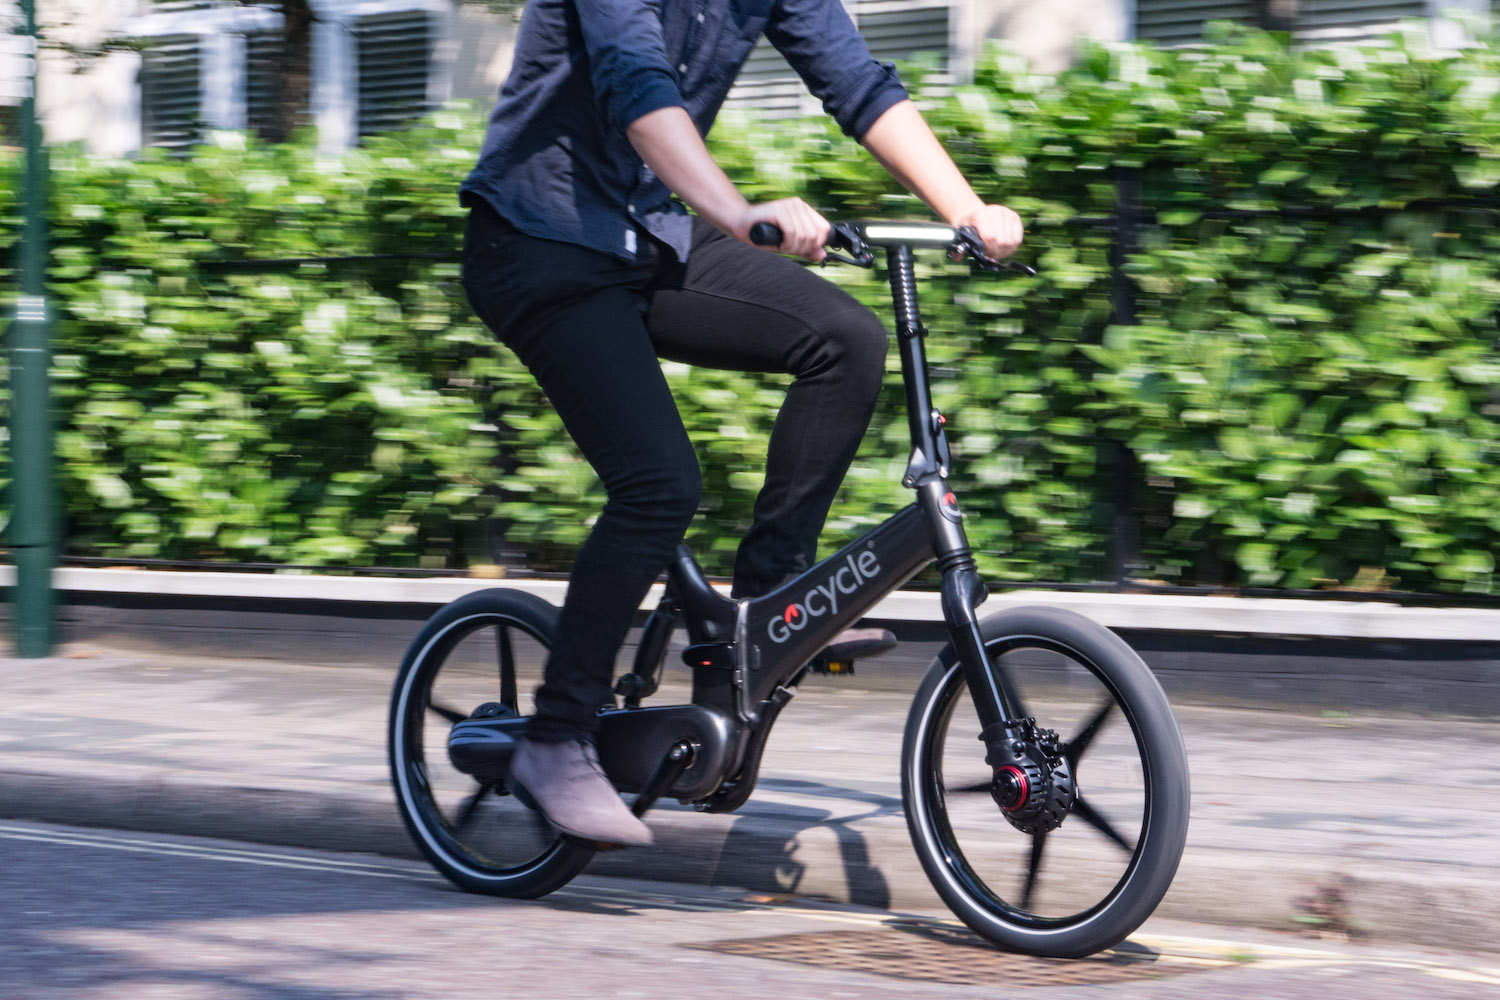 gocycles new gxi electric bike can fold away in a mere 10 seconds gocycle 7